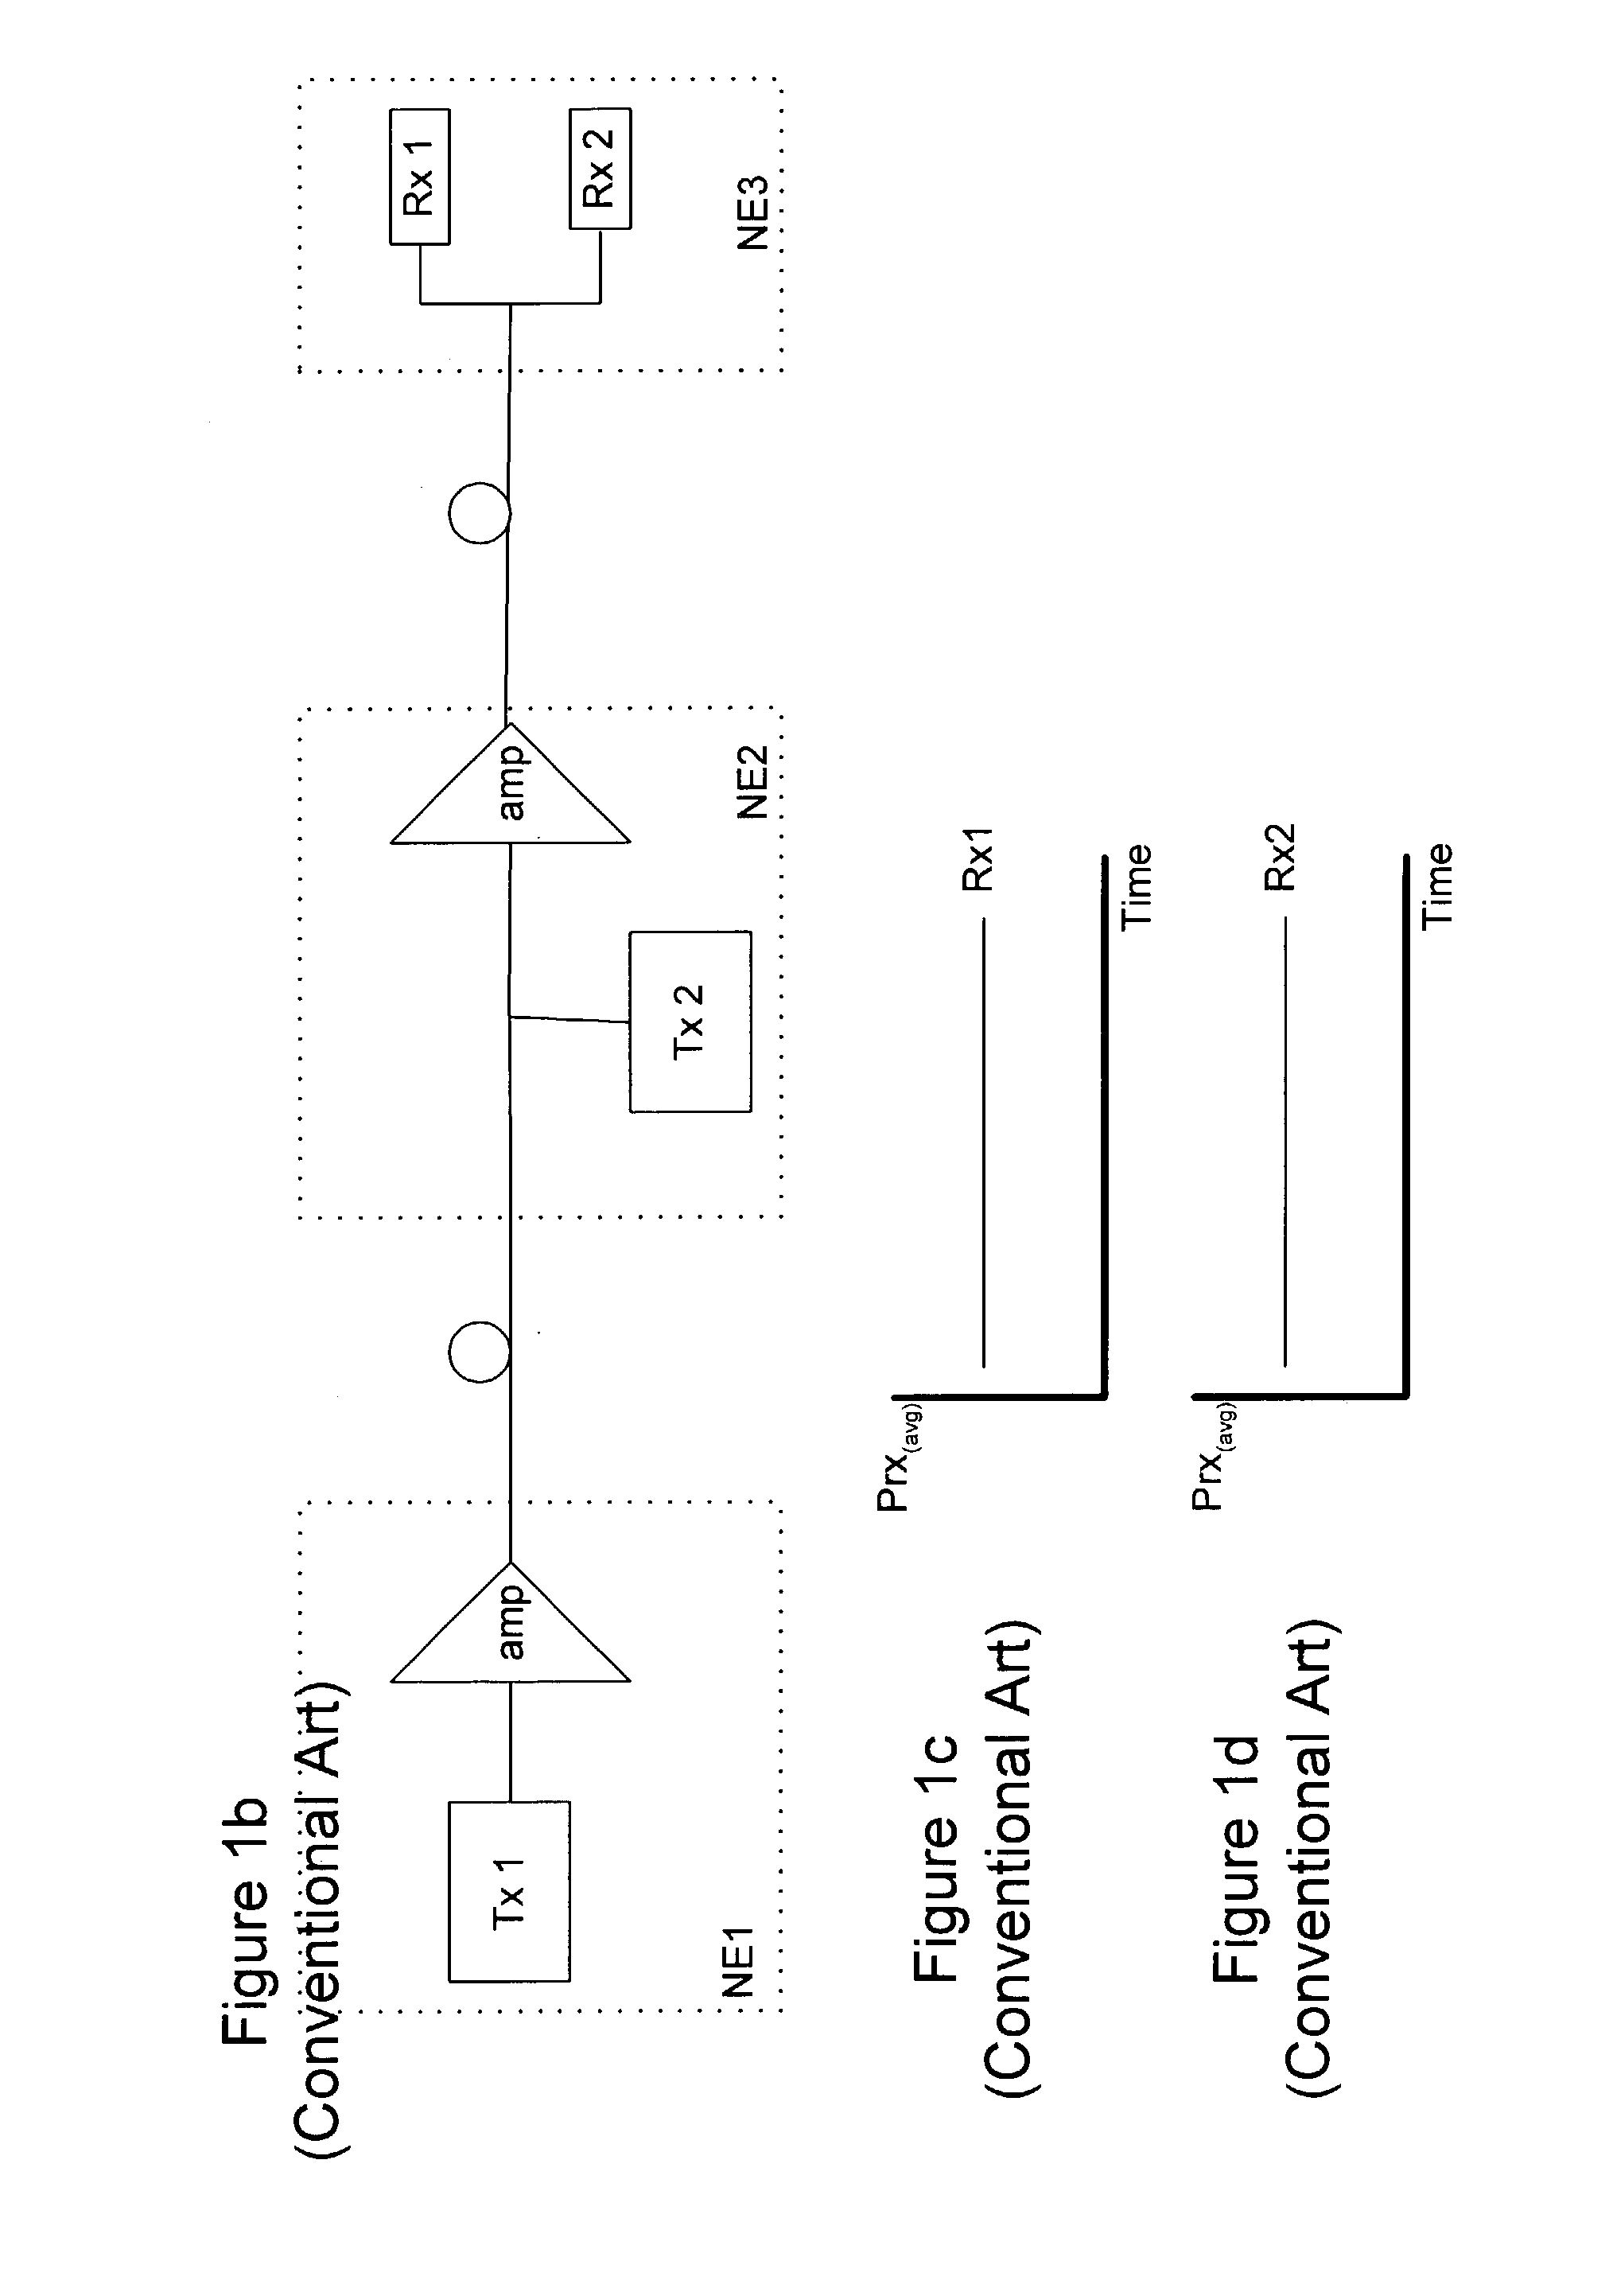 Optical receiver decision threshold tuning apparatus and method